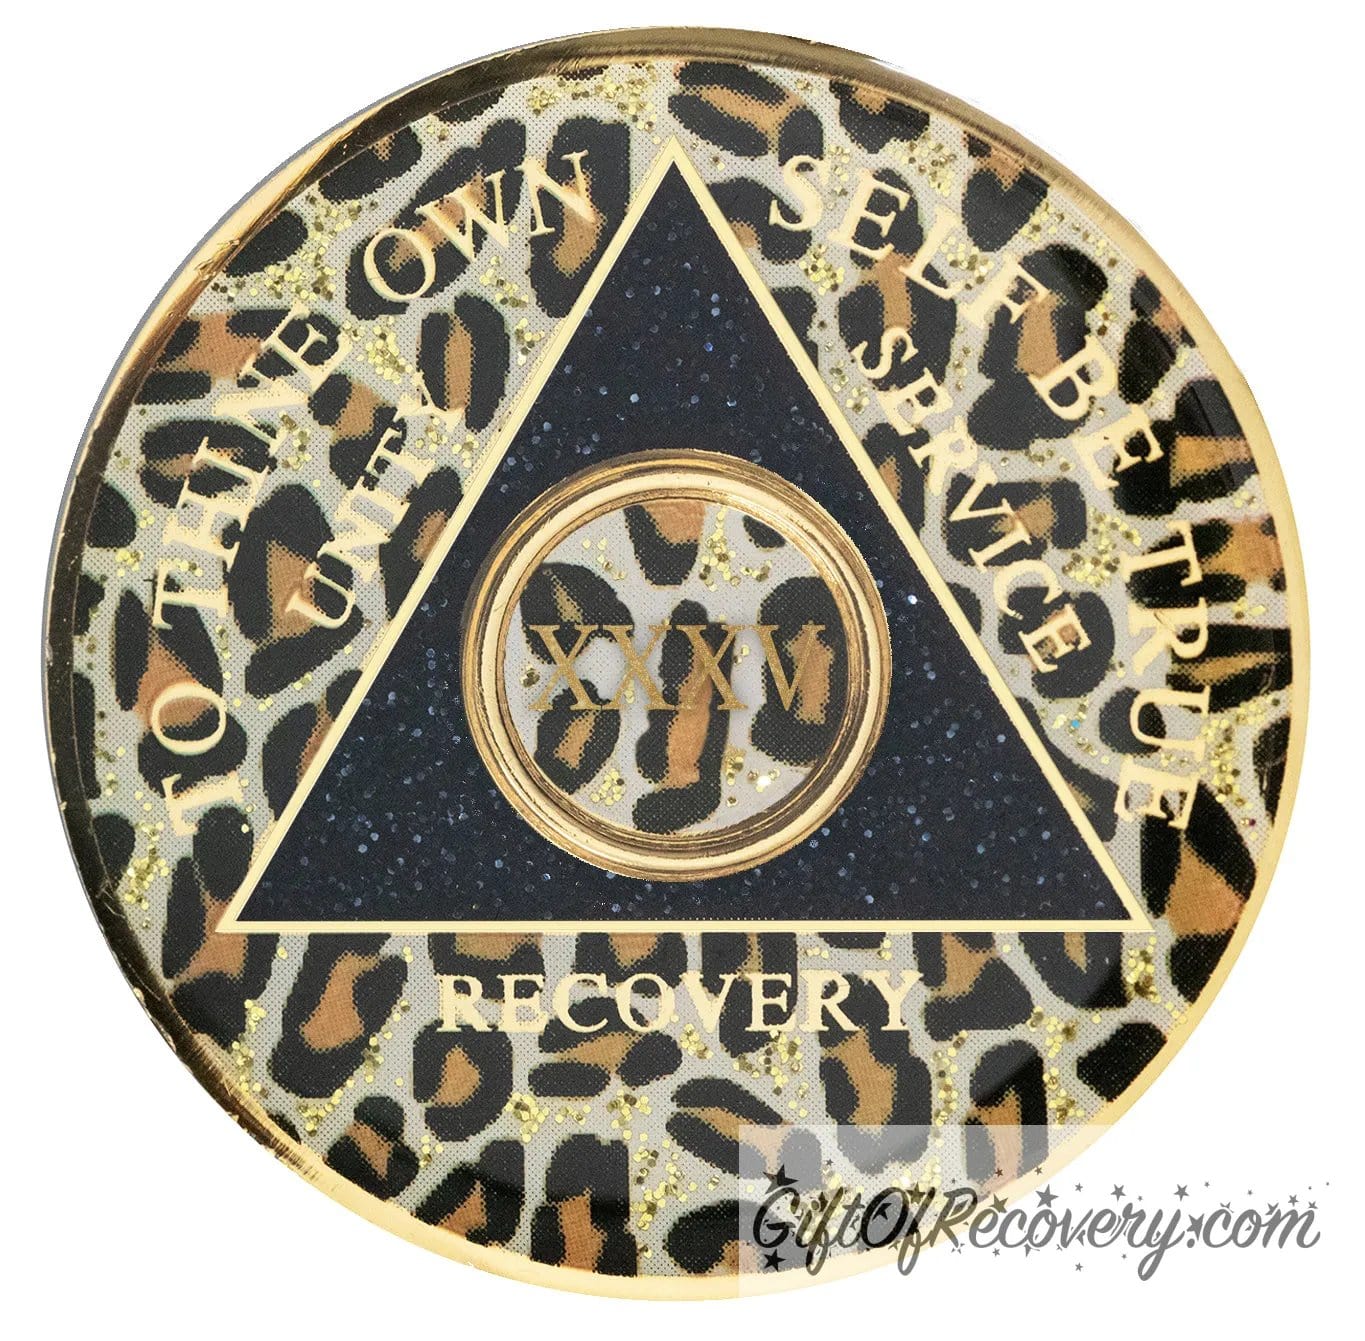 35 year AA medallion leopard print with gold flaked spots, to thine own self be true, unity, service, recovery, and roman numeral are gold foil so you can let your recovery shine, not your time, the circle triangle is embossed with 14k gold-plated brass, the recovery medallion is sealed with resin for a shiny finish.